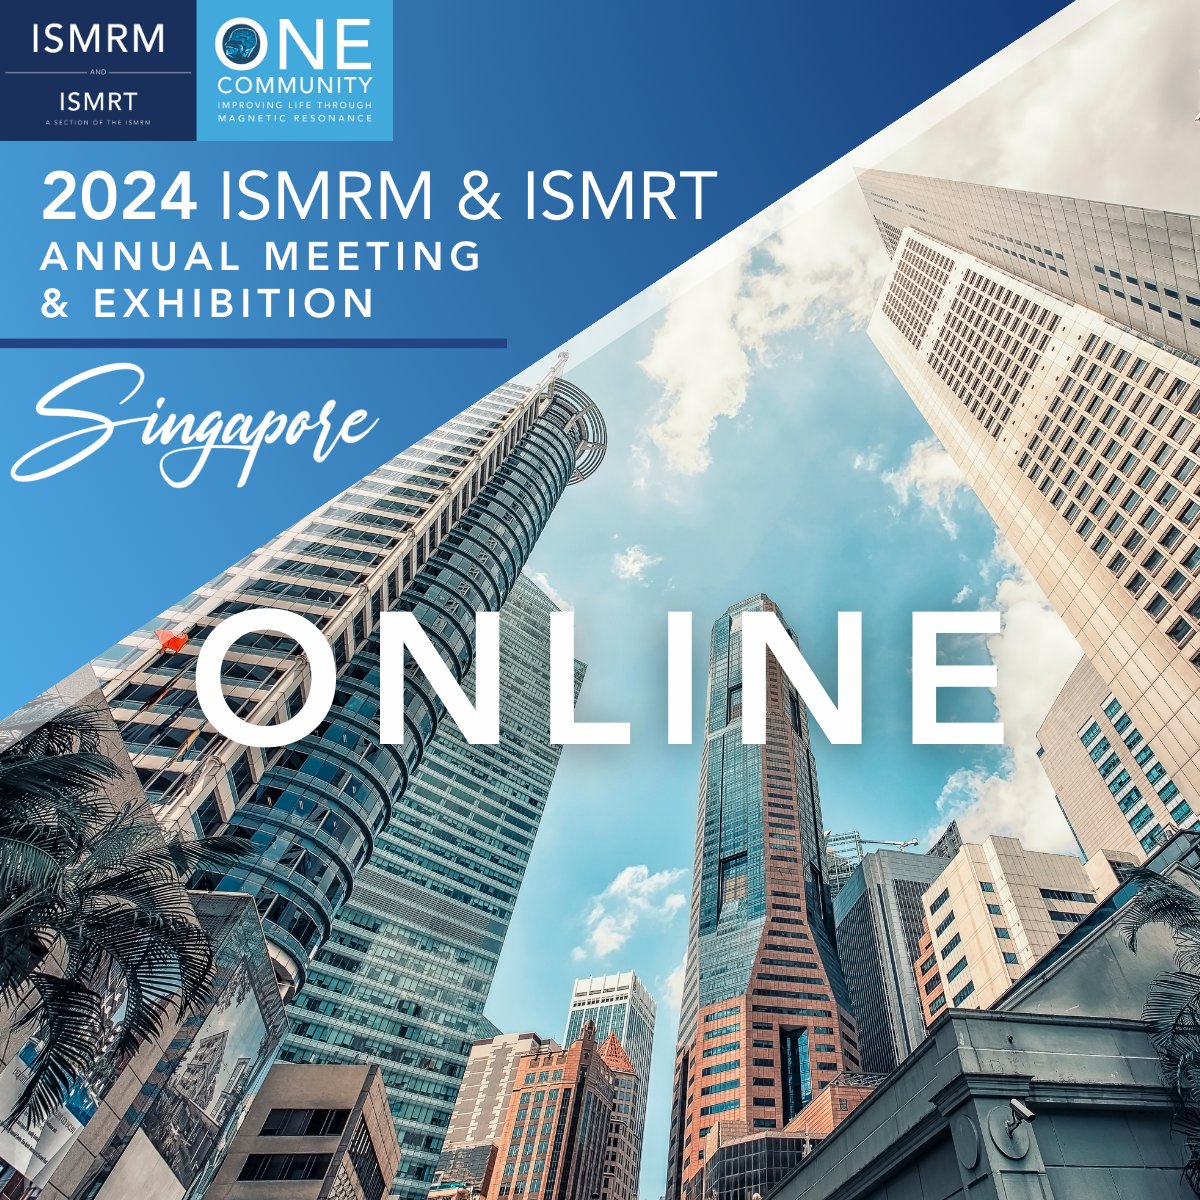 Did you miss a session in Singapore? Attendees of the 2024 ISMRM & ISMRT Annual Meeting & Exhibition can view all sessions online! Start your search now: ow.ly/6u6x50S4Jvp #ISMRM2024 #ISMRT2024 #ISMRM #ISMRT #MRI #MagneticResonance #MR #MedicalImaging #Singapore